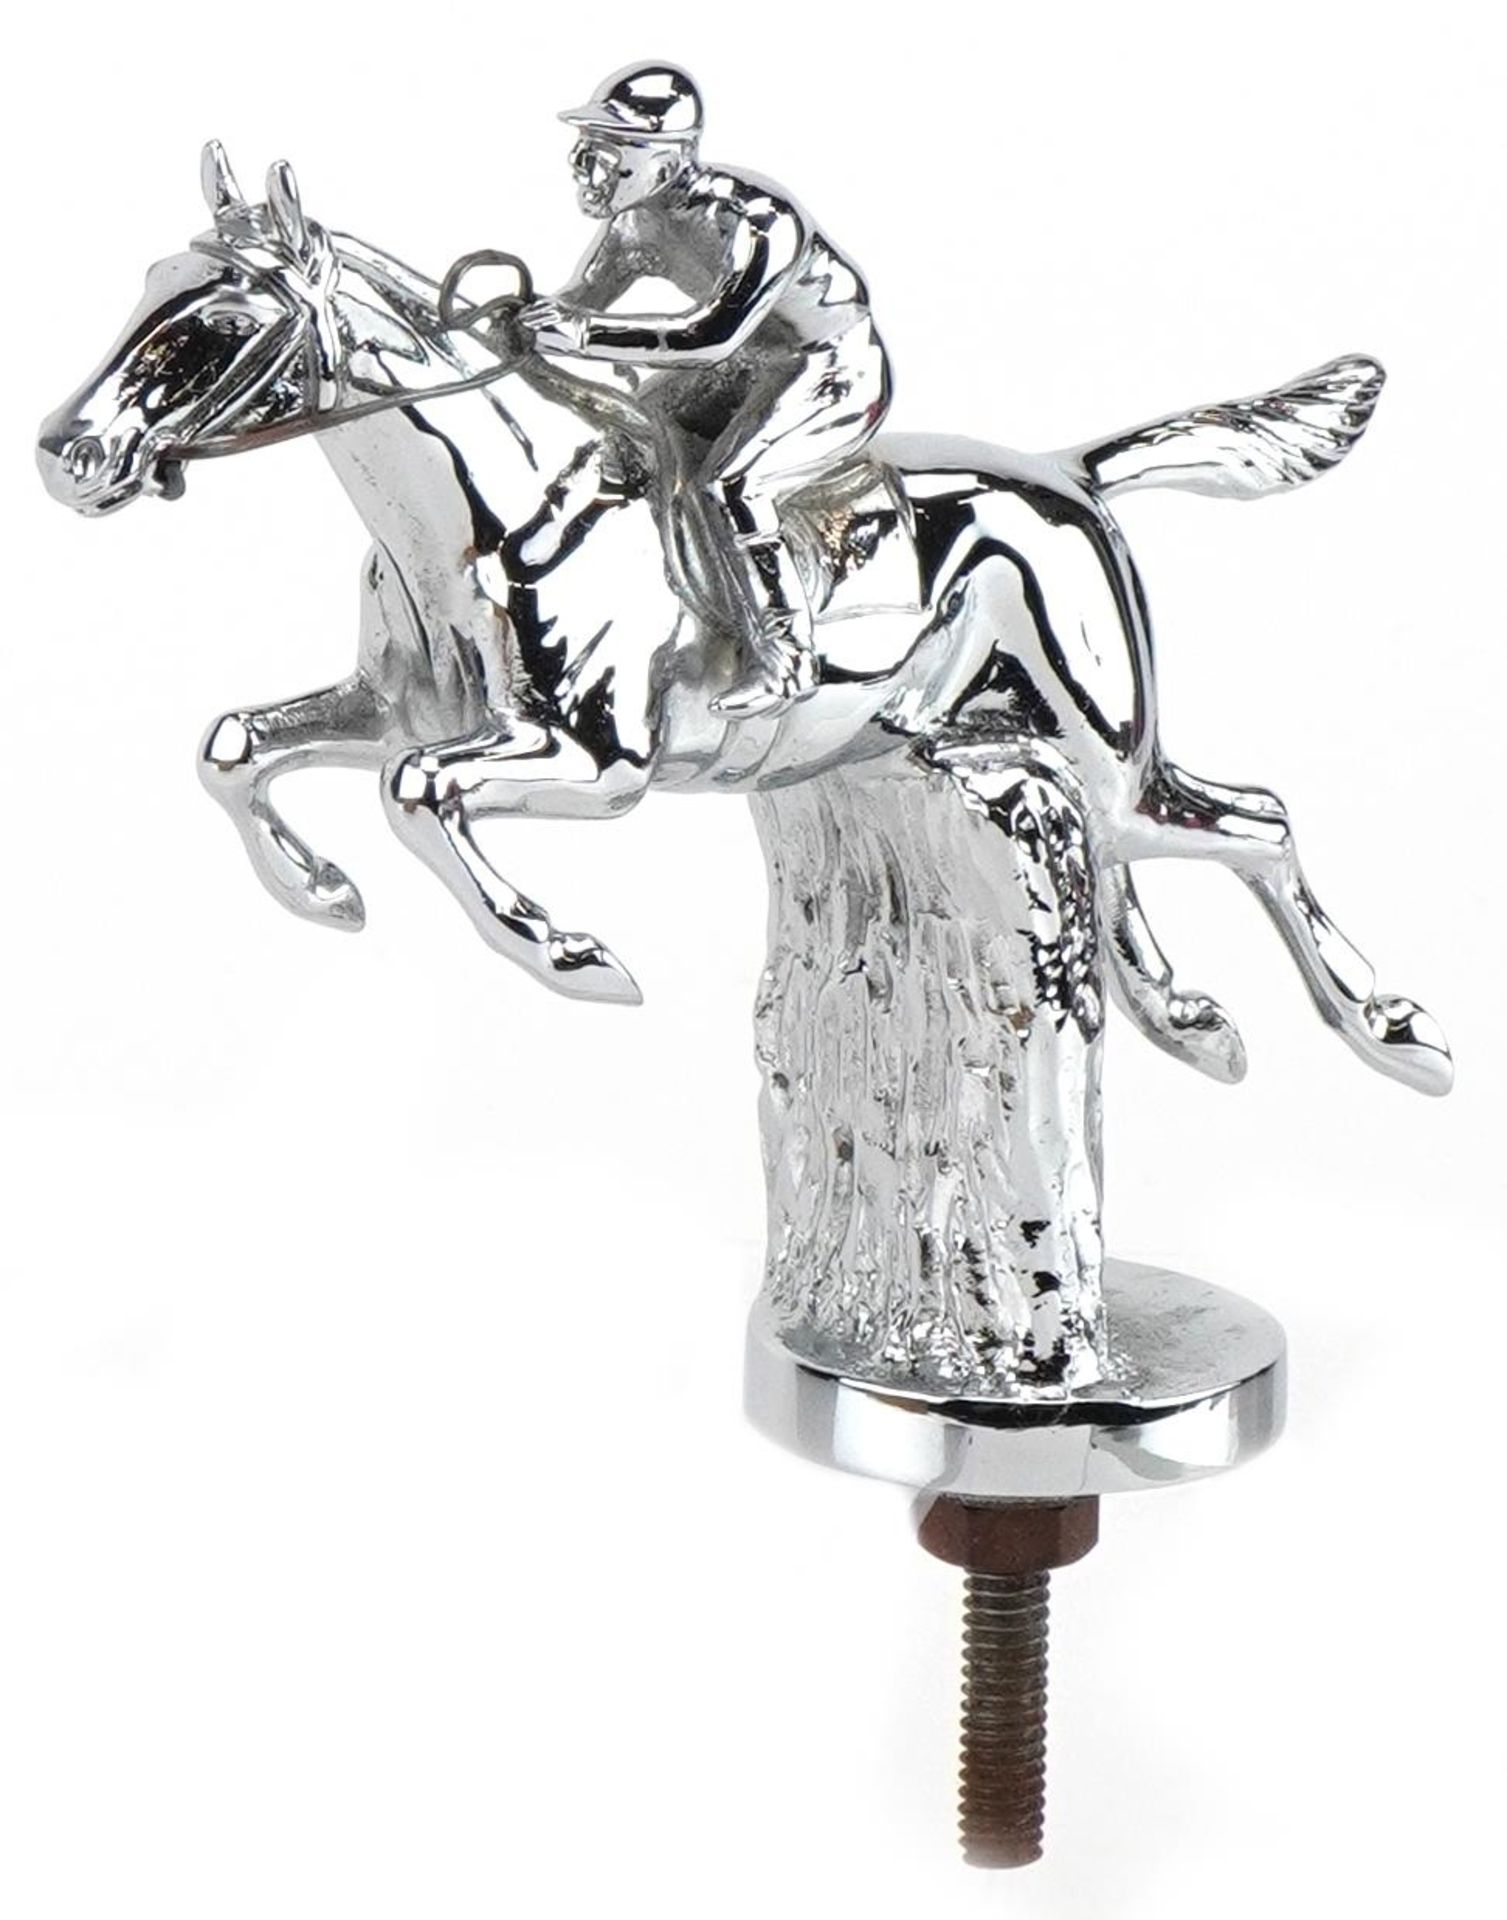 Early 20th century automobilia interest chrome plated car mascot in the form of a jockey on